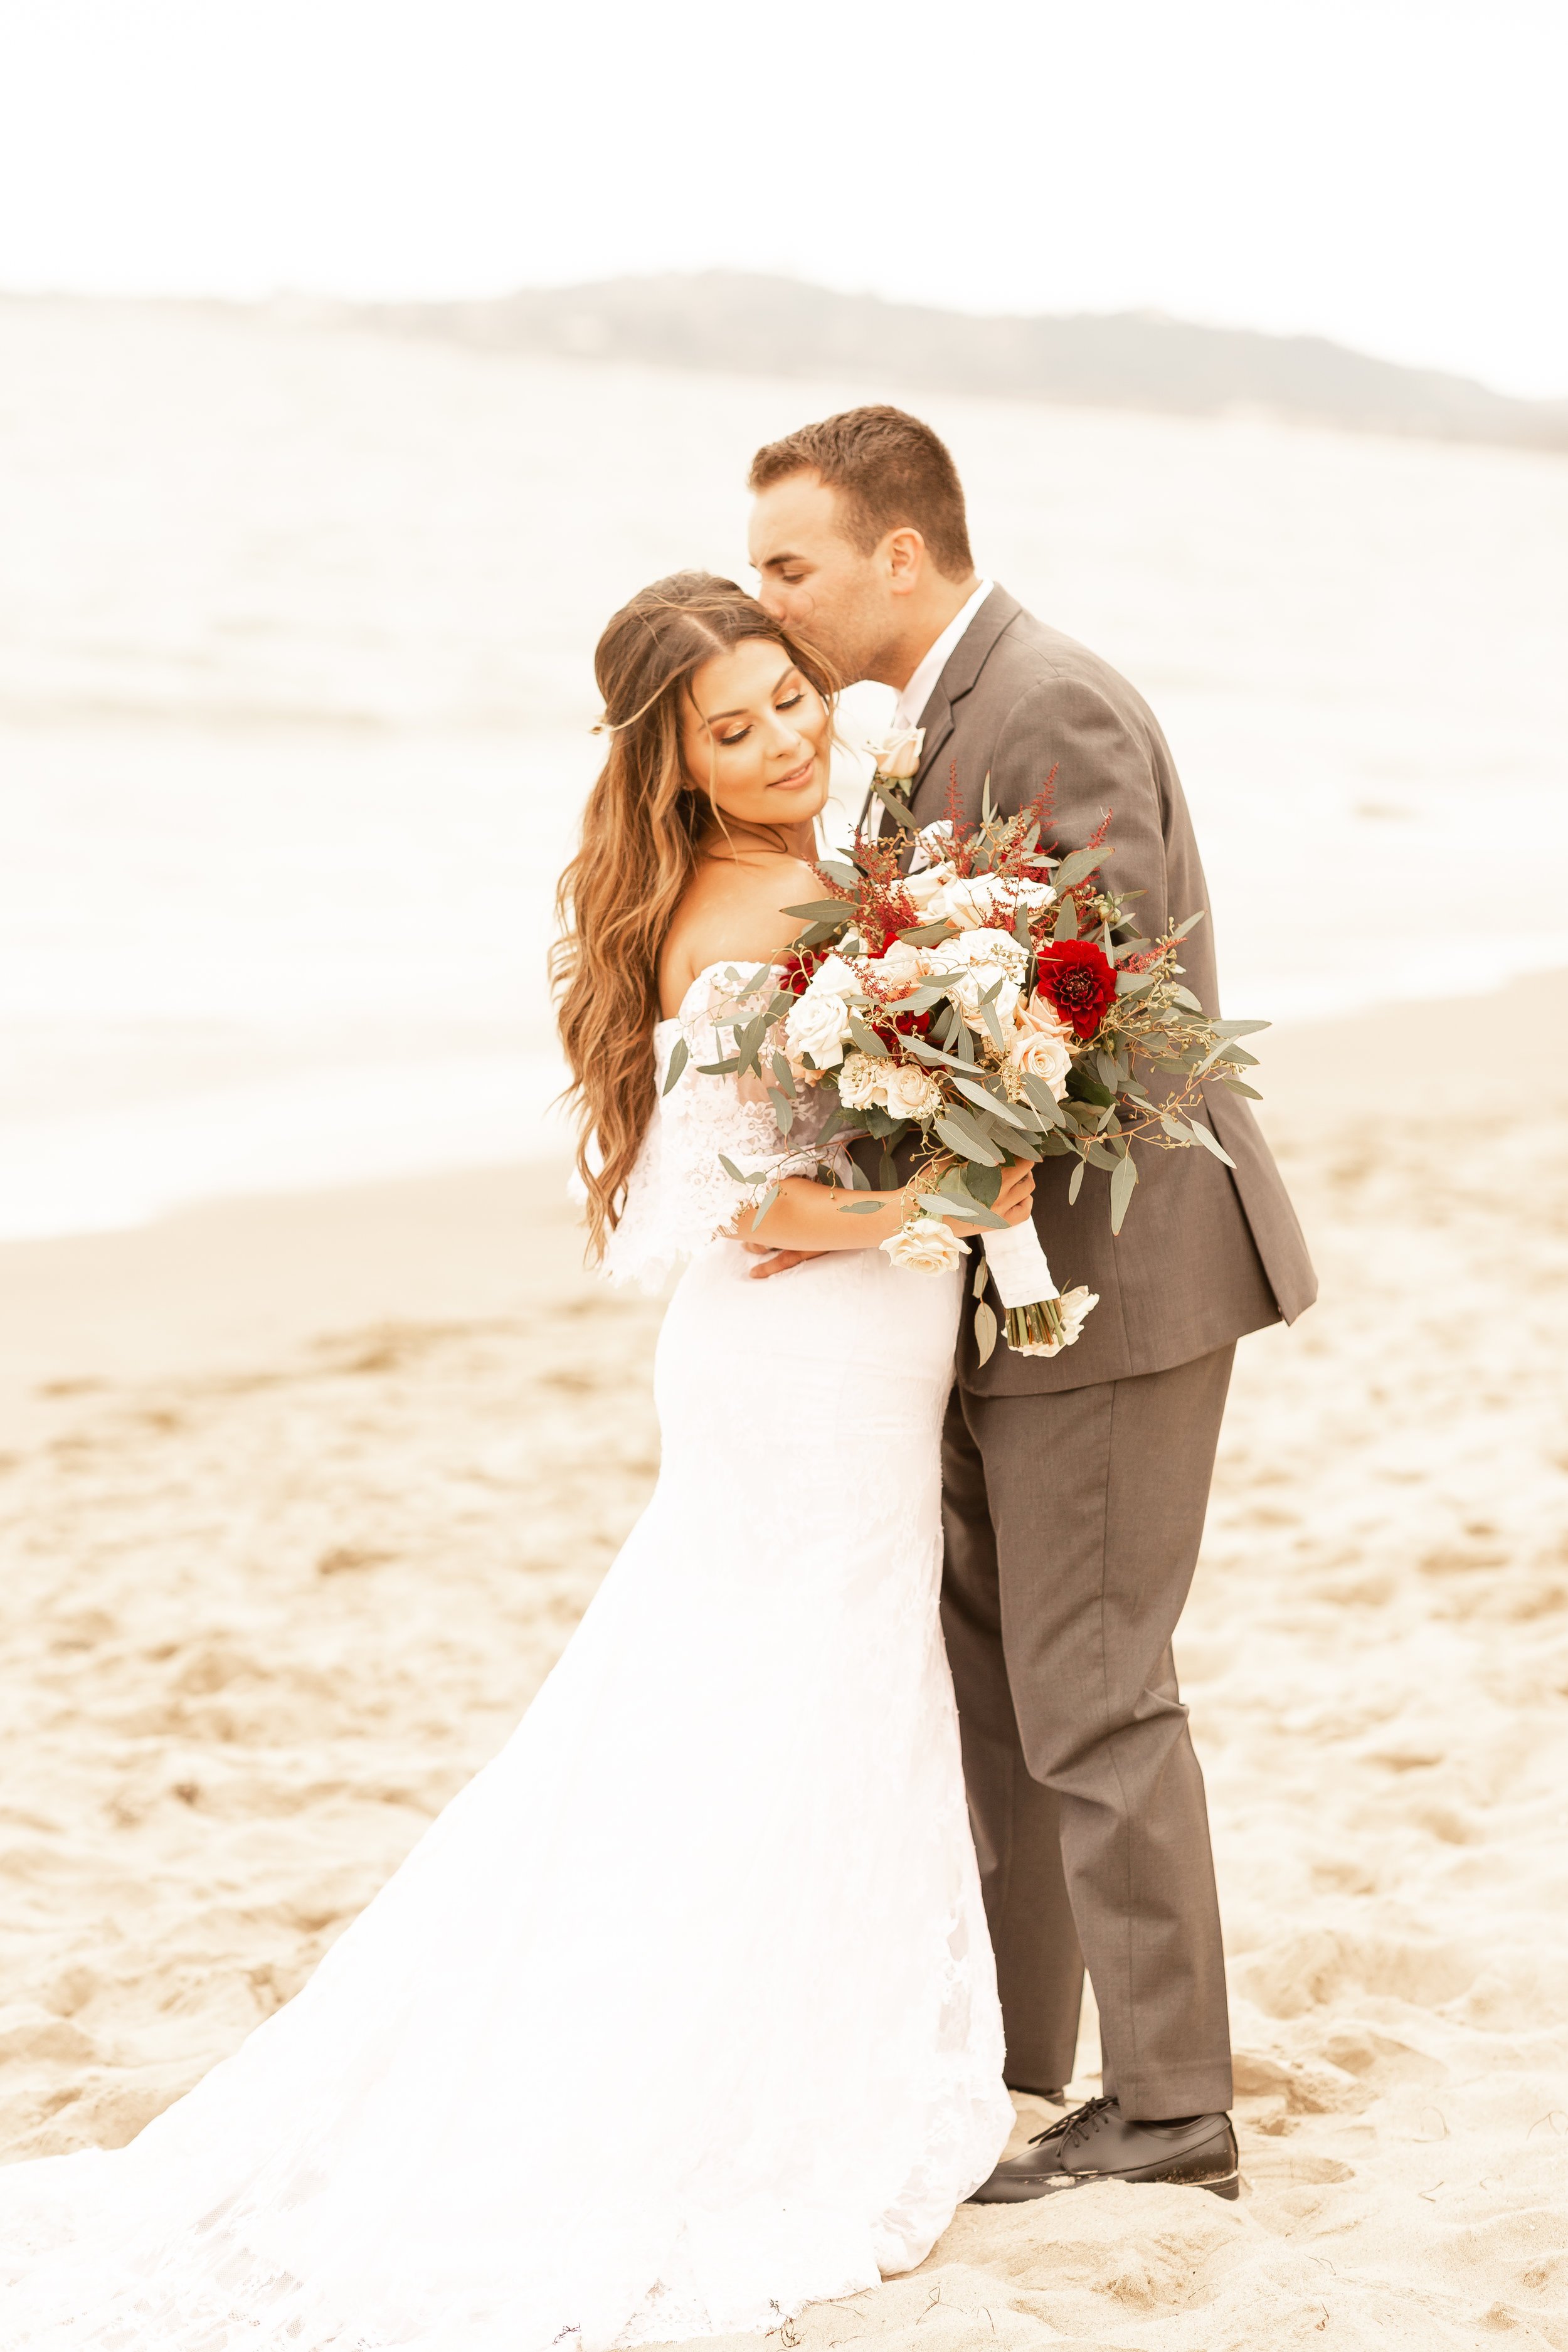 www.santabarbarawedding.com | Shot By Katie Gunz | Manning Park | Santa Barbara Courthouse | Weddings by the Sea | Makeup by Raven | wedding couples portraits on beach